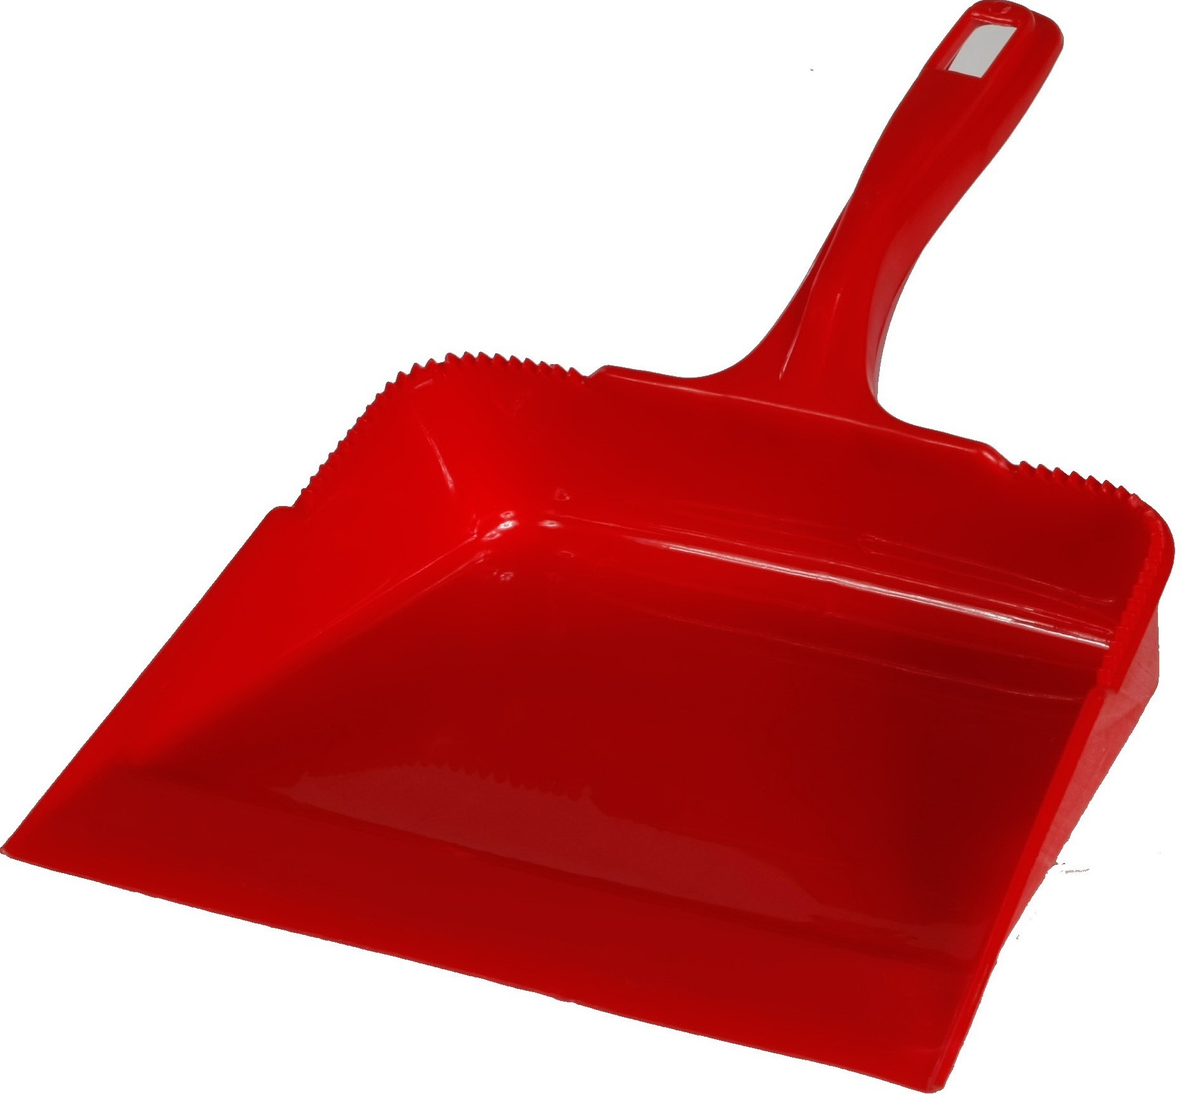 Red cleaning. Dustpan. Pan, Dust / совок. Dustpan Green. Pepprig пепприг совок/щетка.